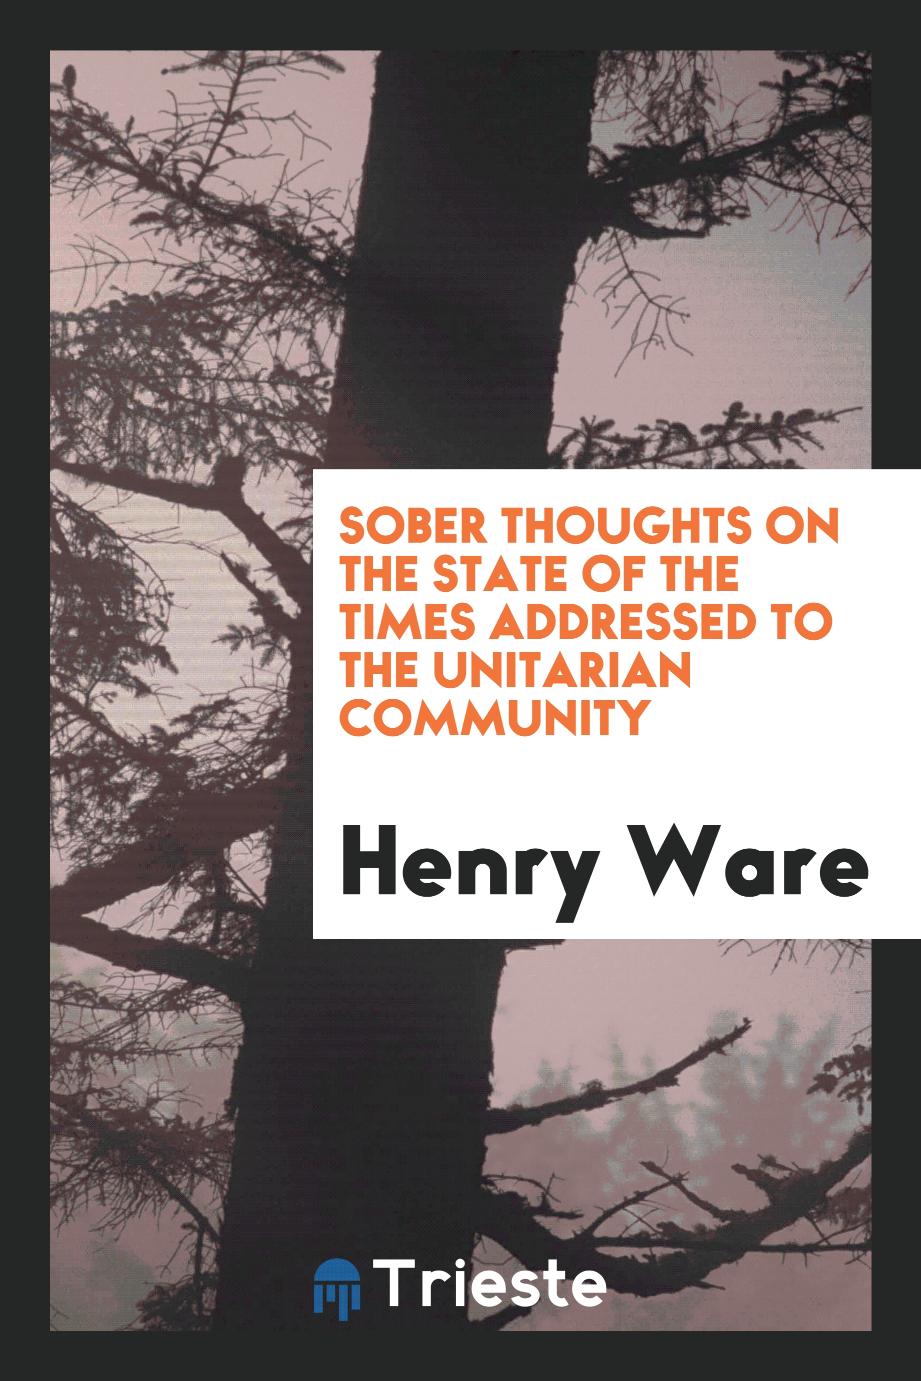 Sober Thoughts on the State of the Times Addressed to the Unitarian Community